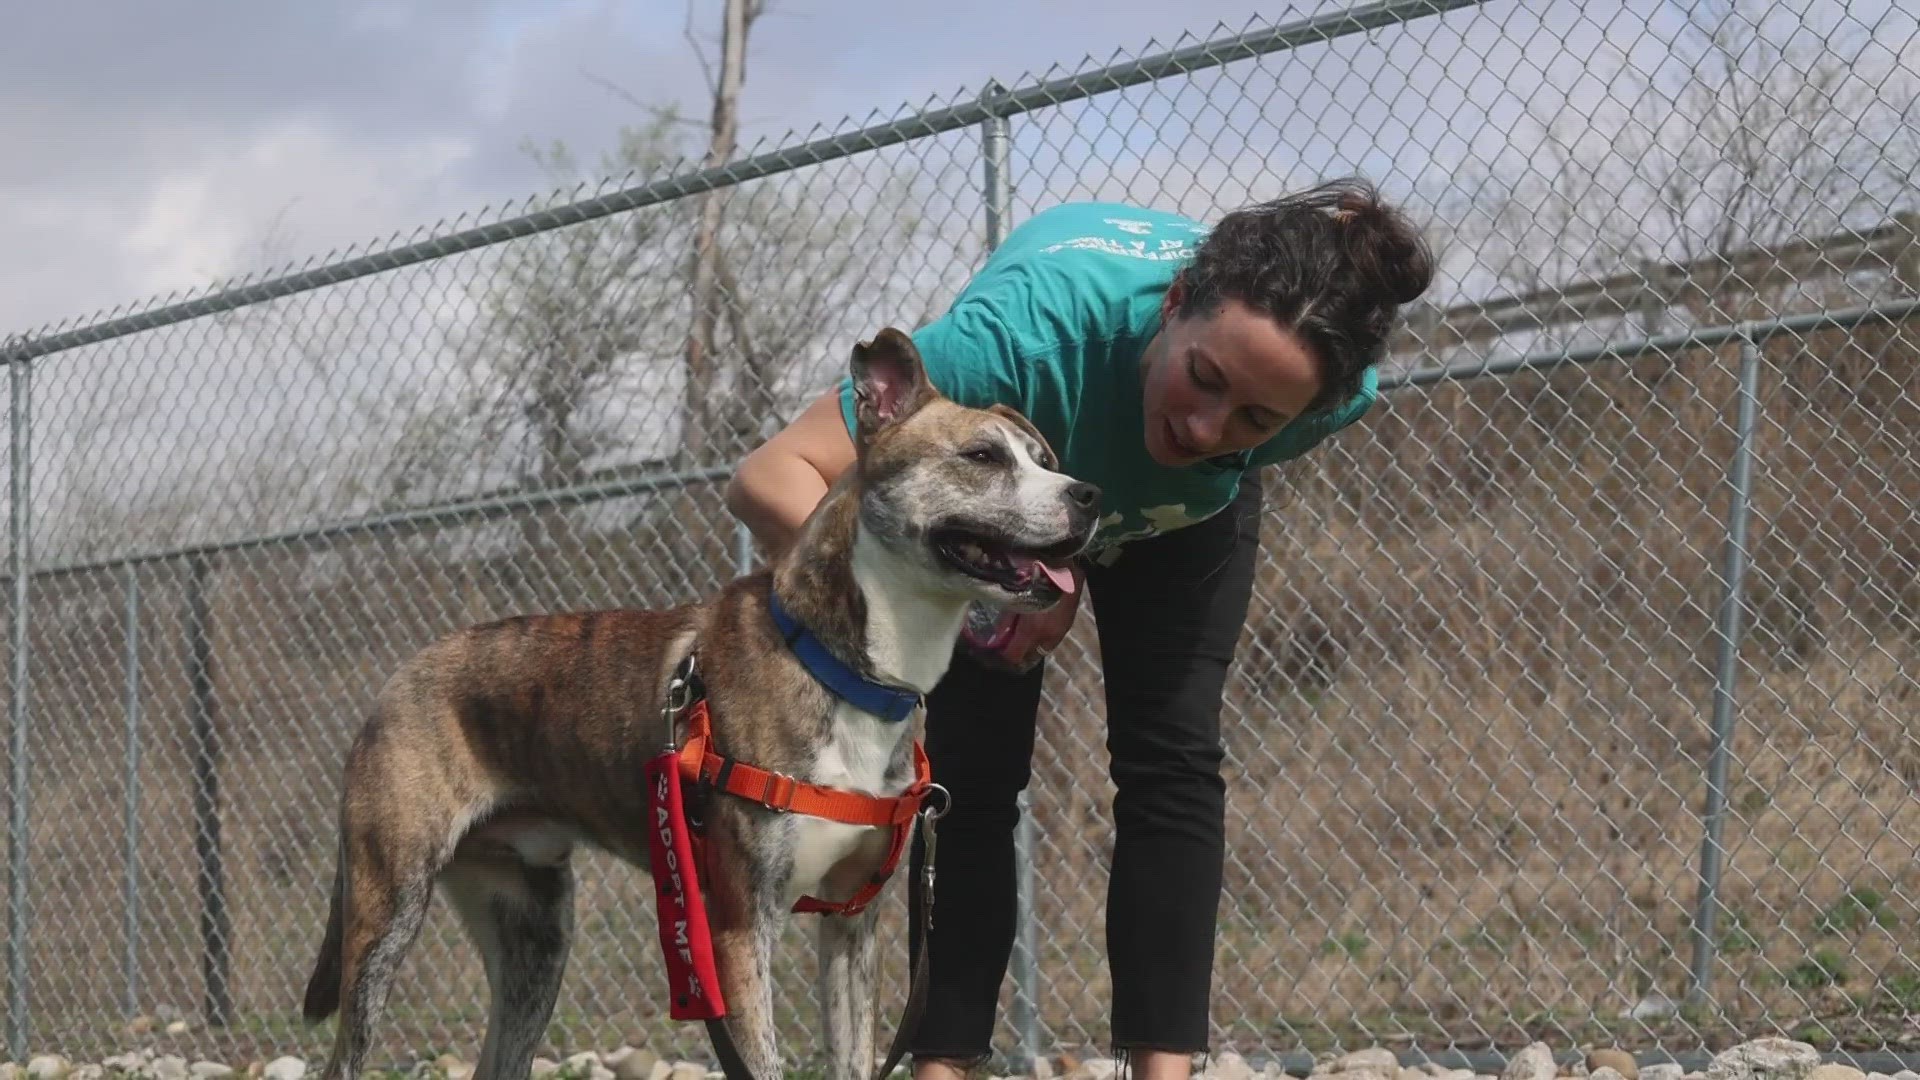 'Uber Driver' was adopted on March 14, but was unfortunately returned to the shelter after his adopter said her work hours increased and she couldn't care for him.